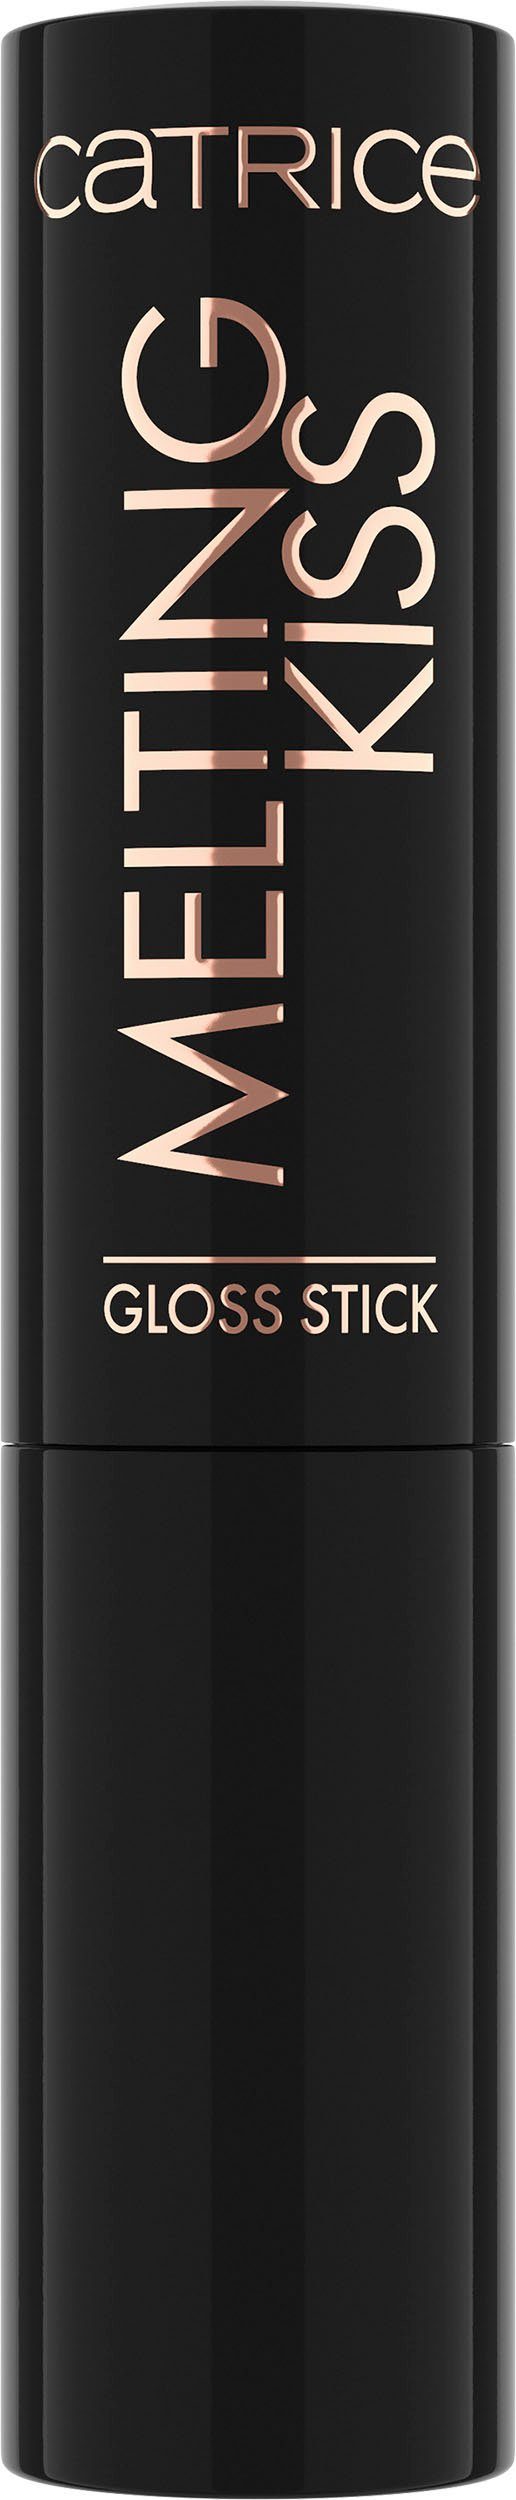 Lippenstift 3-tlg. Stick, Catrice You Adore Kiss Melting Catrice Gloss